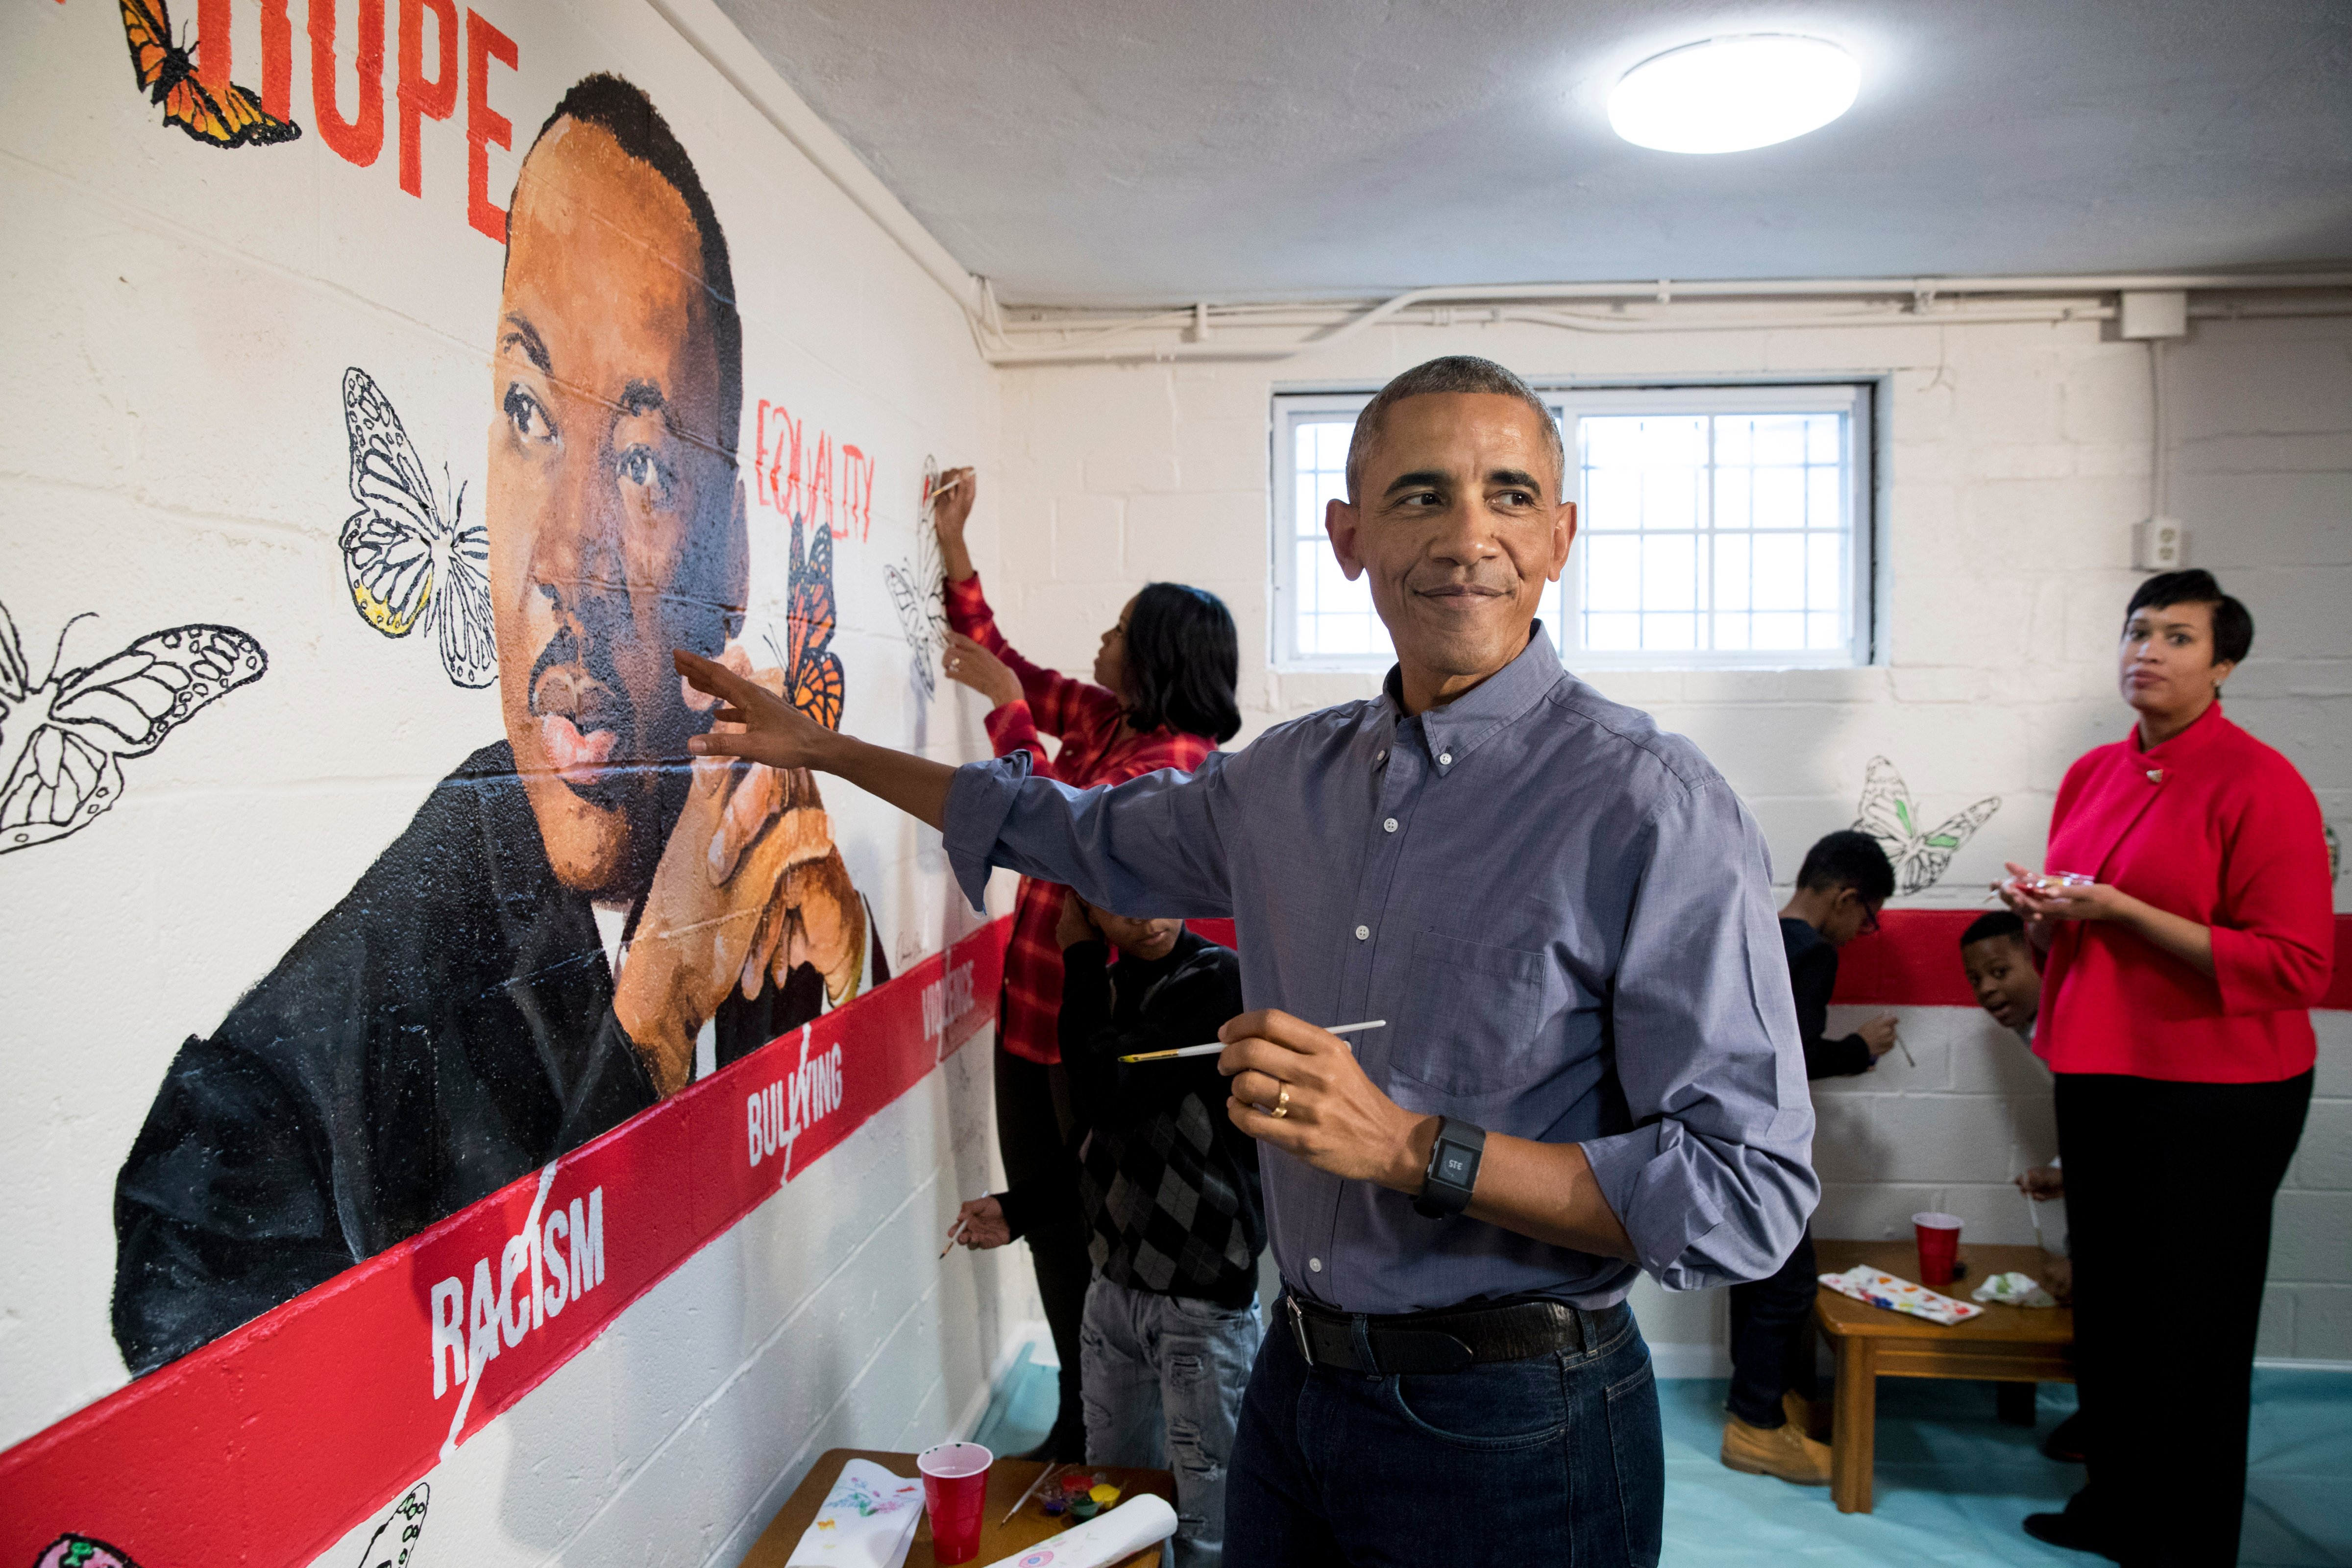 WASHINGTON, DC - JANUARY 16: (AFP OUT) U.S. President Barack Obama (Front) and First Lady Michelle Obama (Back) help paint a mural depicting Martin Luther King Jr., as Mayor of Washington DC Muriel Bowser (R) looks on, at the Jobs Have Priority Naylor Road Family ShelterJanuary 16, 2017 in Washington, DC. President Obama and the First Lady attended a service event at the Jobs Have Priority Naylor Road Family Shelter for Martin Luther King Jr. Day. (Photo by MICHAEL REYNOLDS-Pool/Getty Images) (Pool—Getty Images)